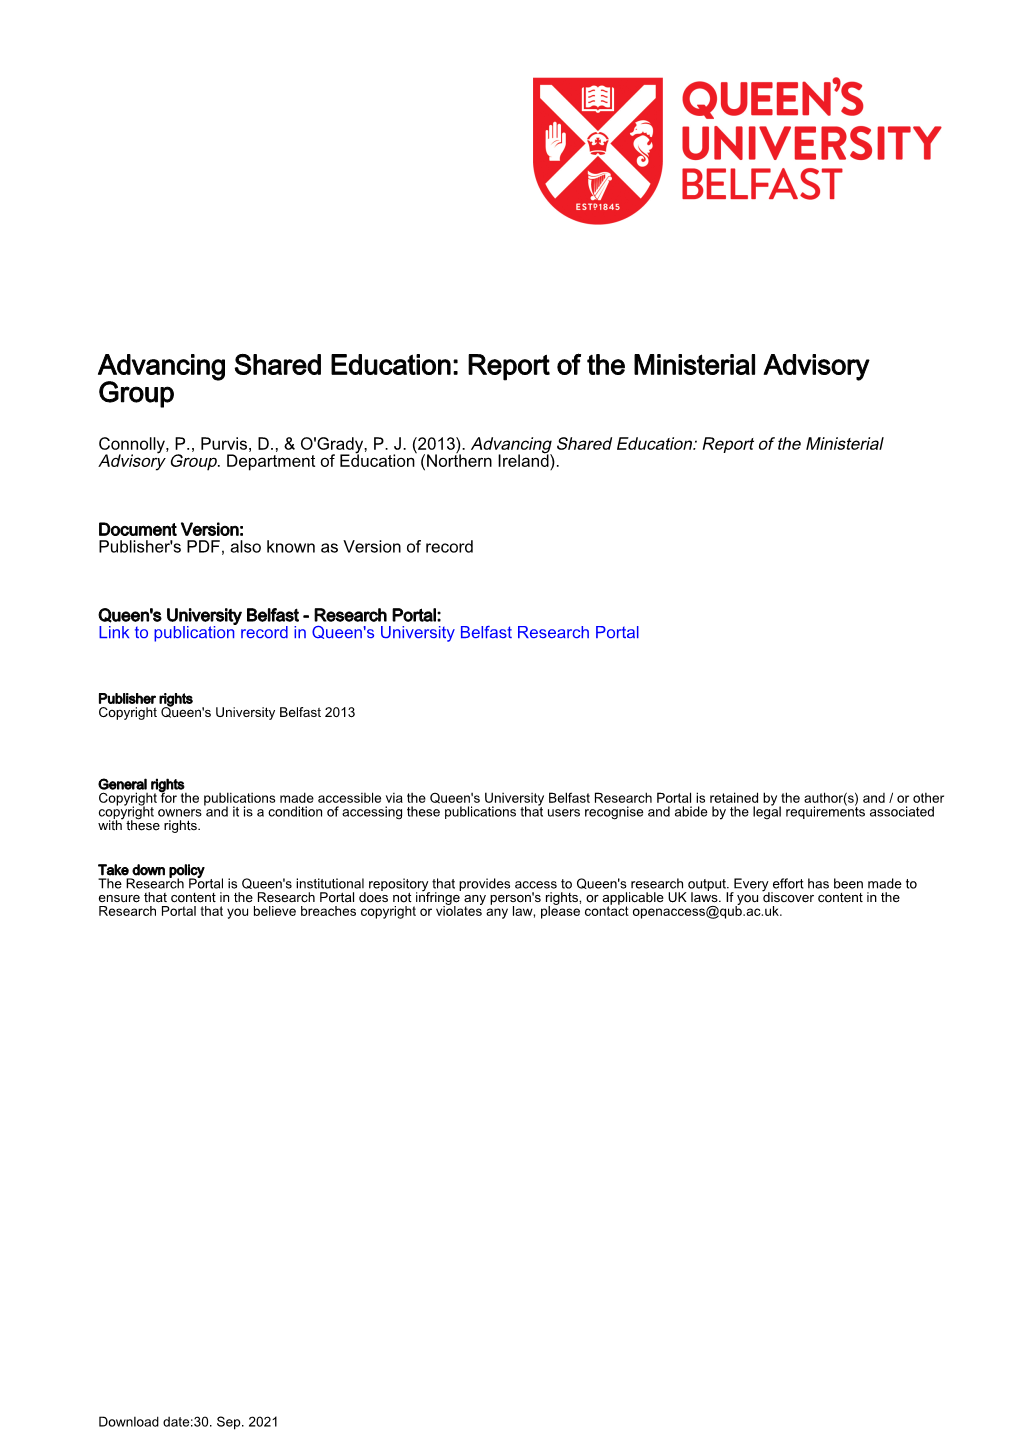 Advancing Shared Education: Report of the Ministerial Advisory Group